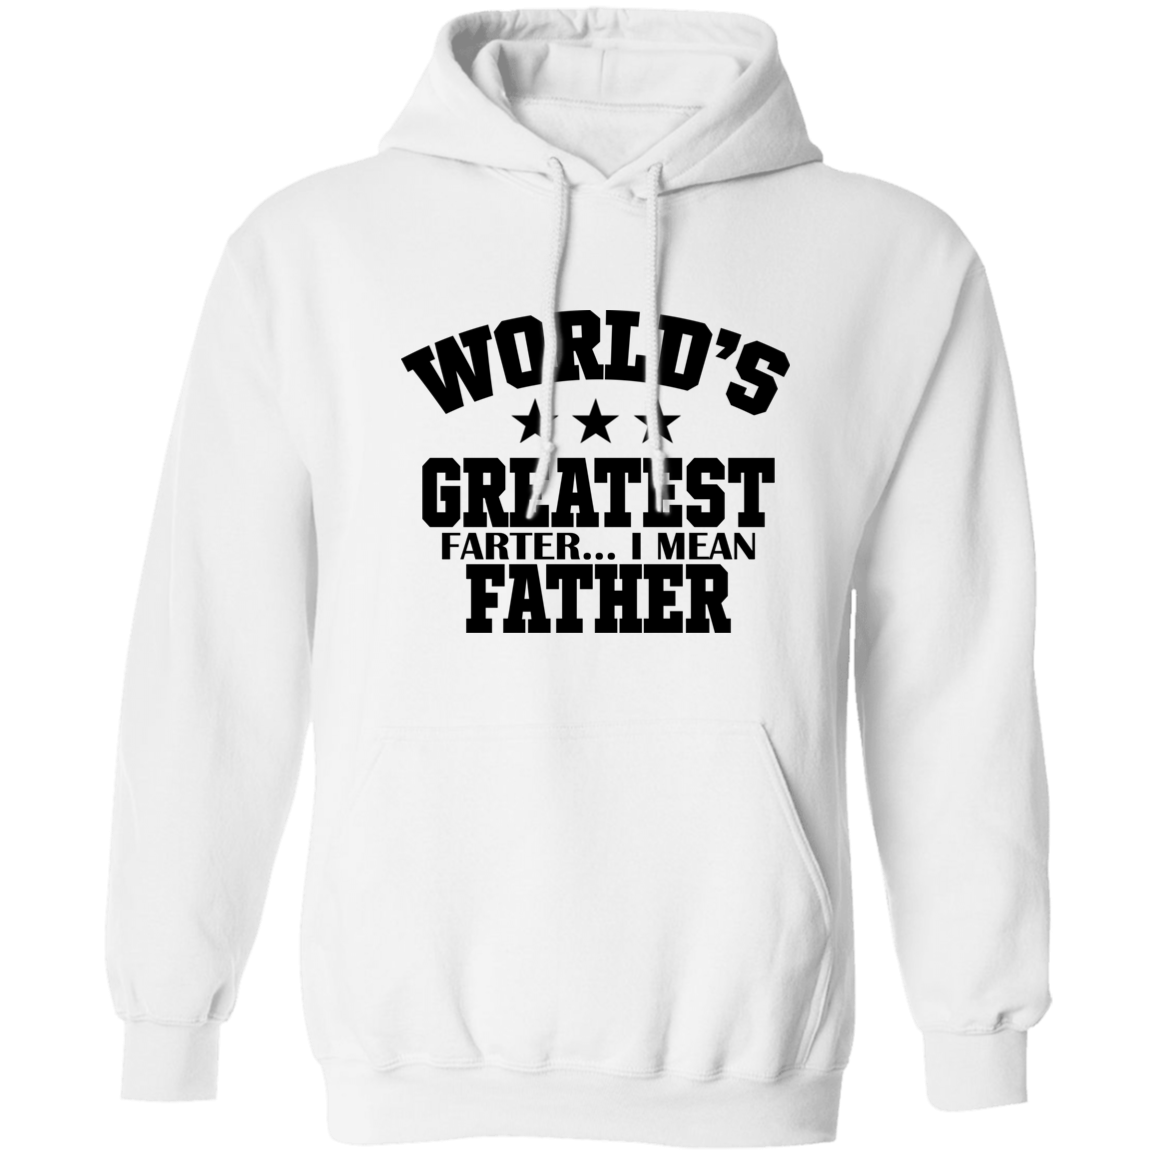 World's Greatest Farter I Mean Father, Funny Father Gift Unisex T-Shirt, Sweatshirt, Hoodie